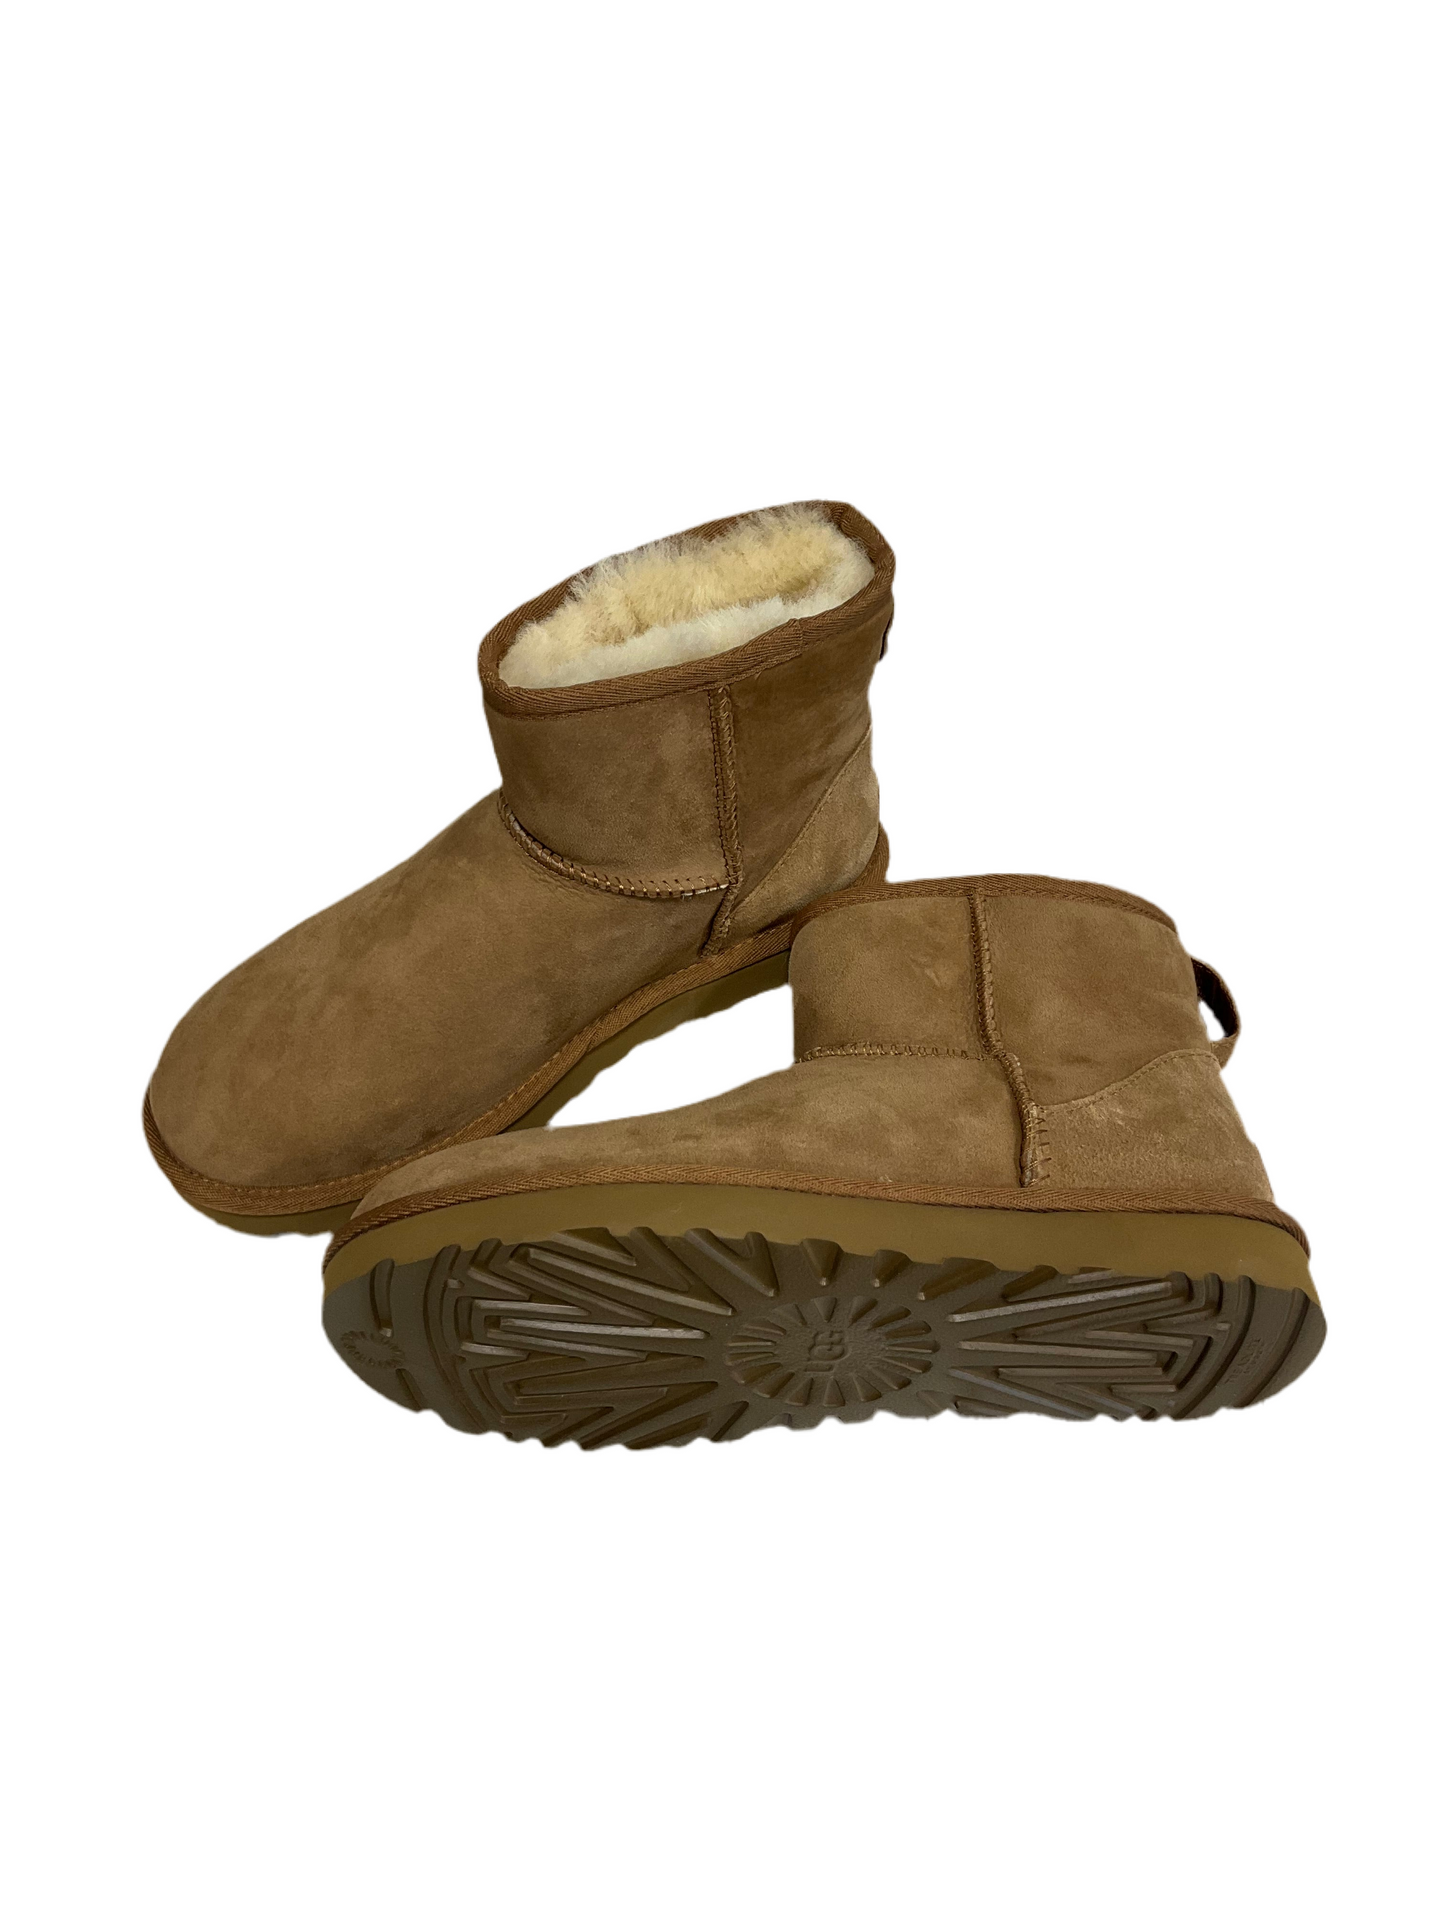 Brown Boots Ankle Flats Ugg, Size 7